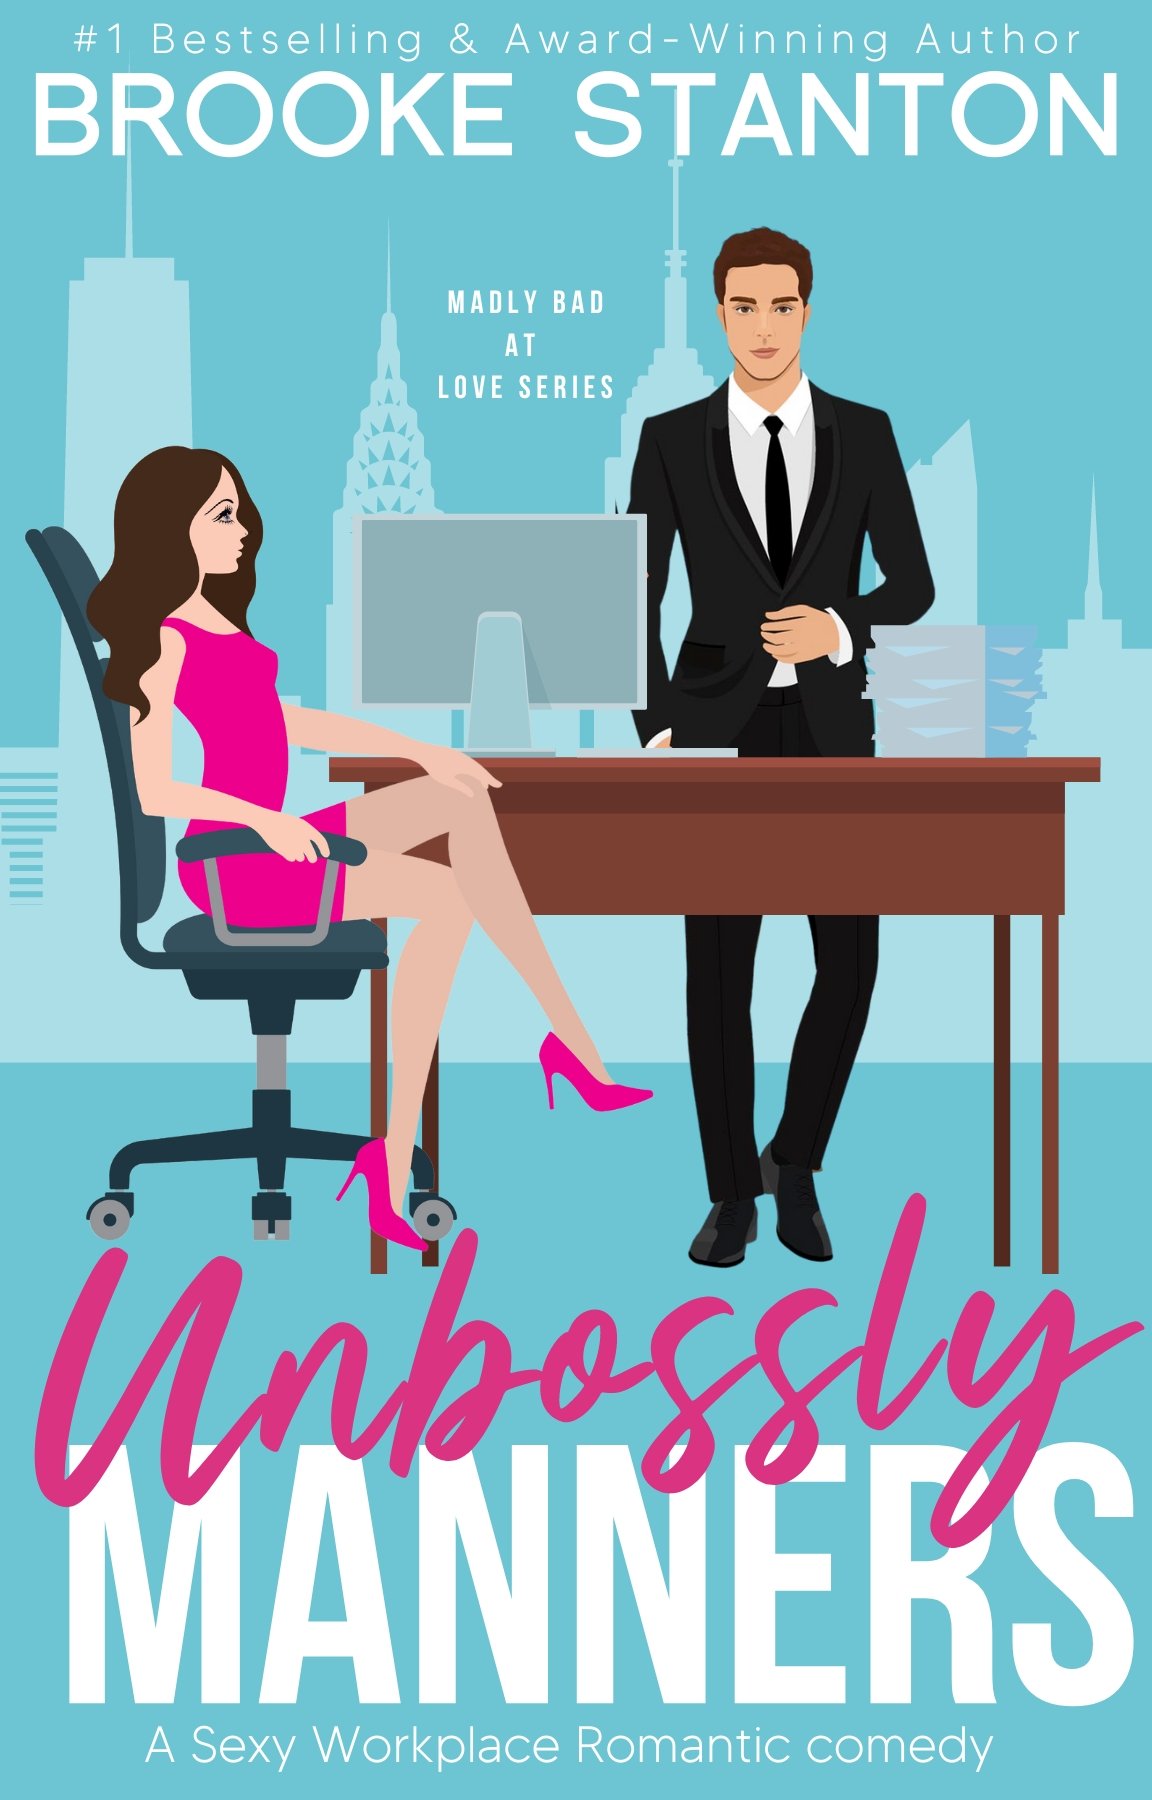 Unbossly Manners MASTER cover KDP NEW-2.jpg